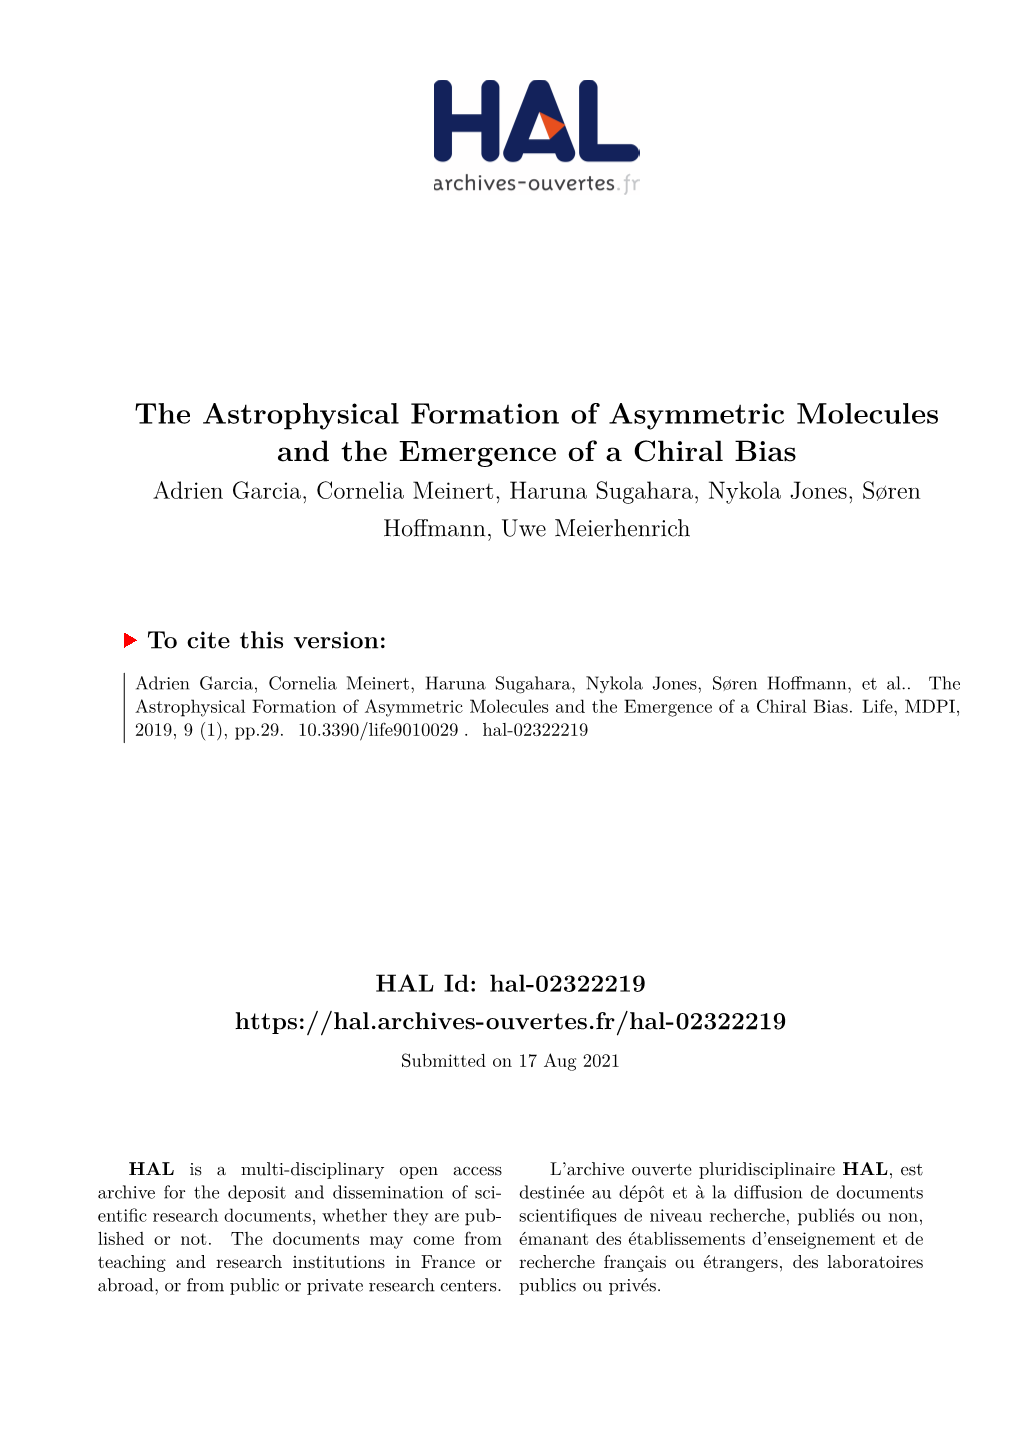 The Astrophysical Formation of Asymmetric Molecules and the Emergence of a Chiral Bias